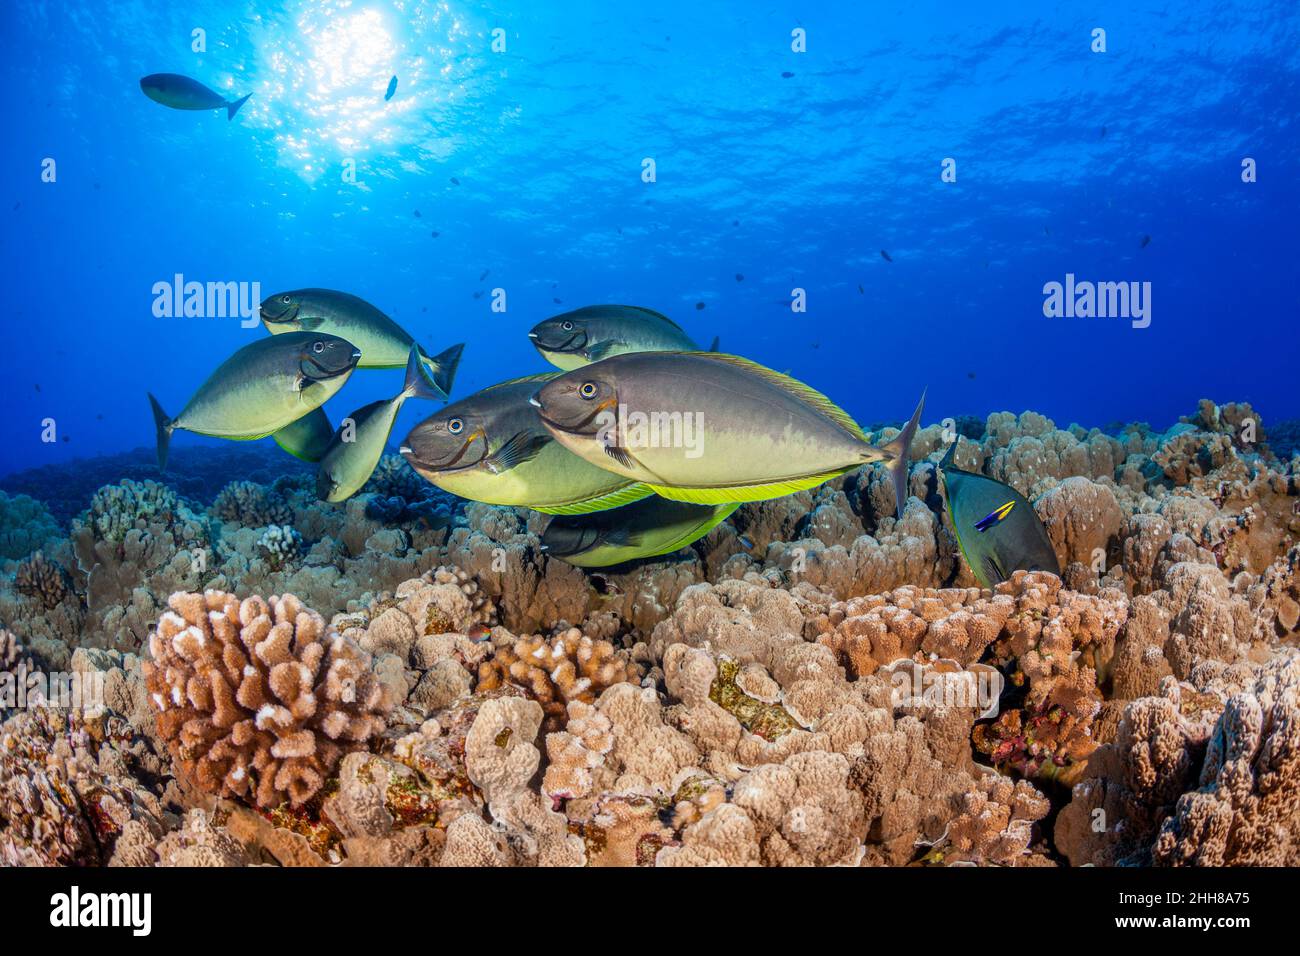 These sleek unicornfish, Naso hexacanthus, are all lining up at a cleaning station on a Hawaiian reef. The are vying for the attention of one endemic Stock Photo